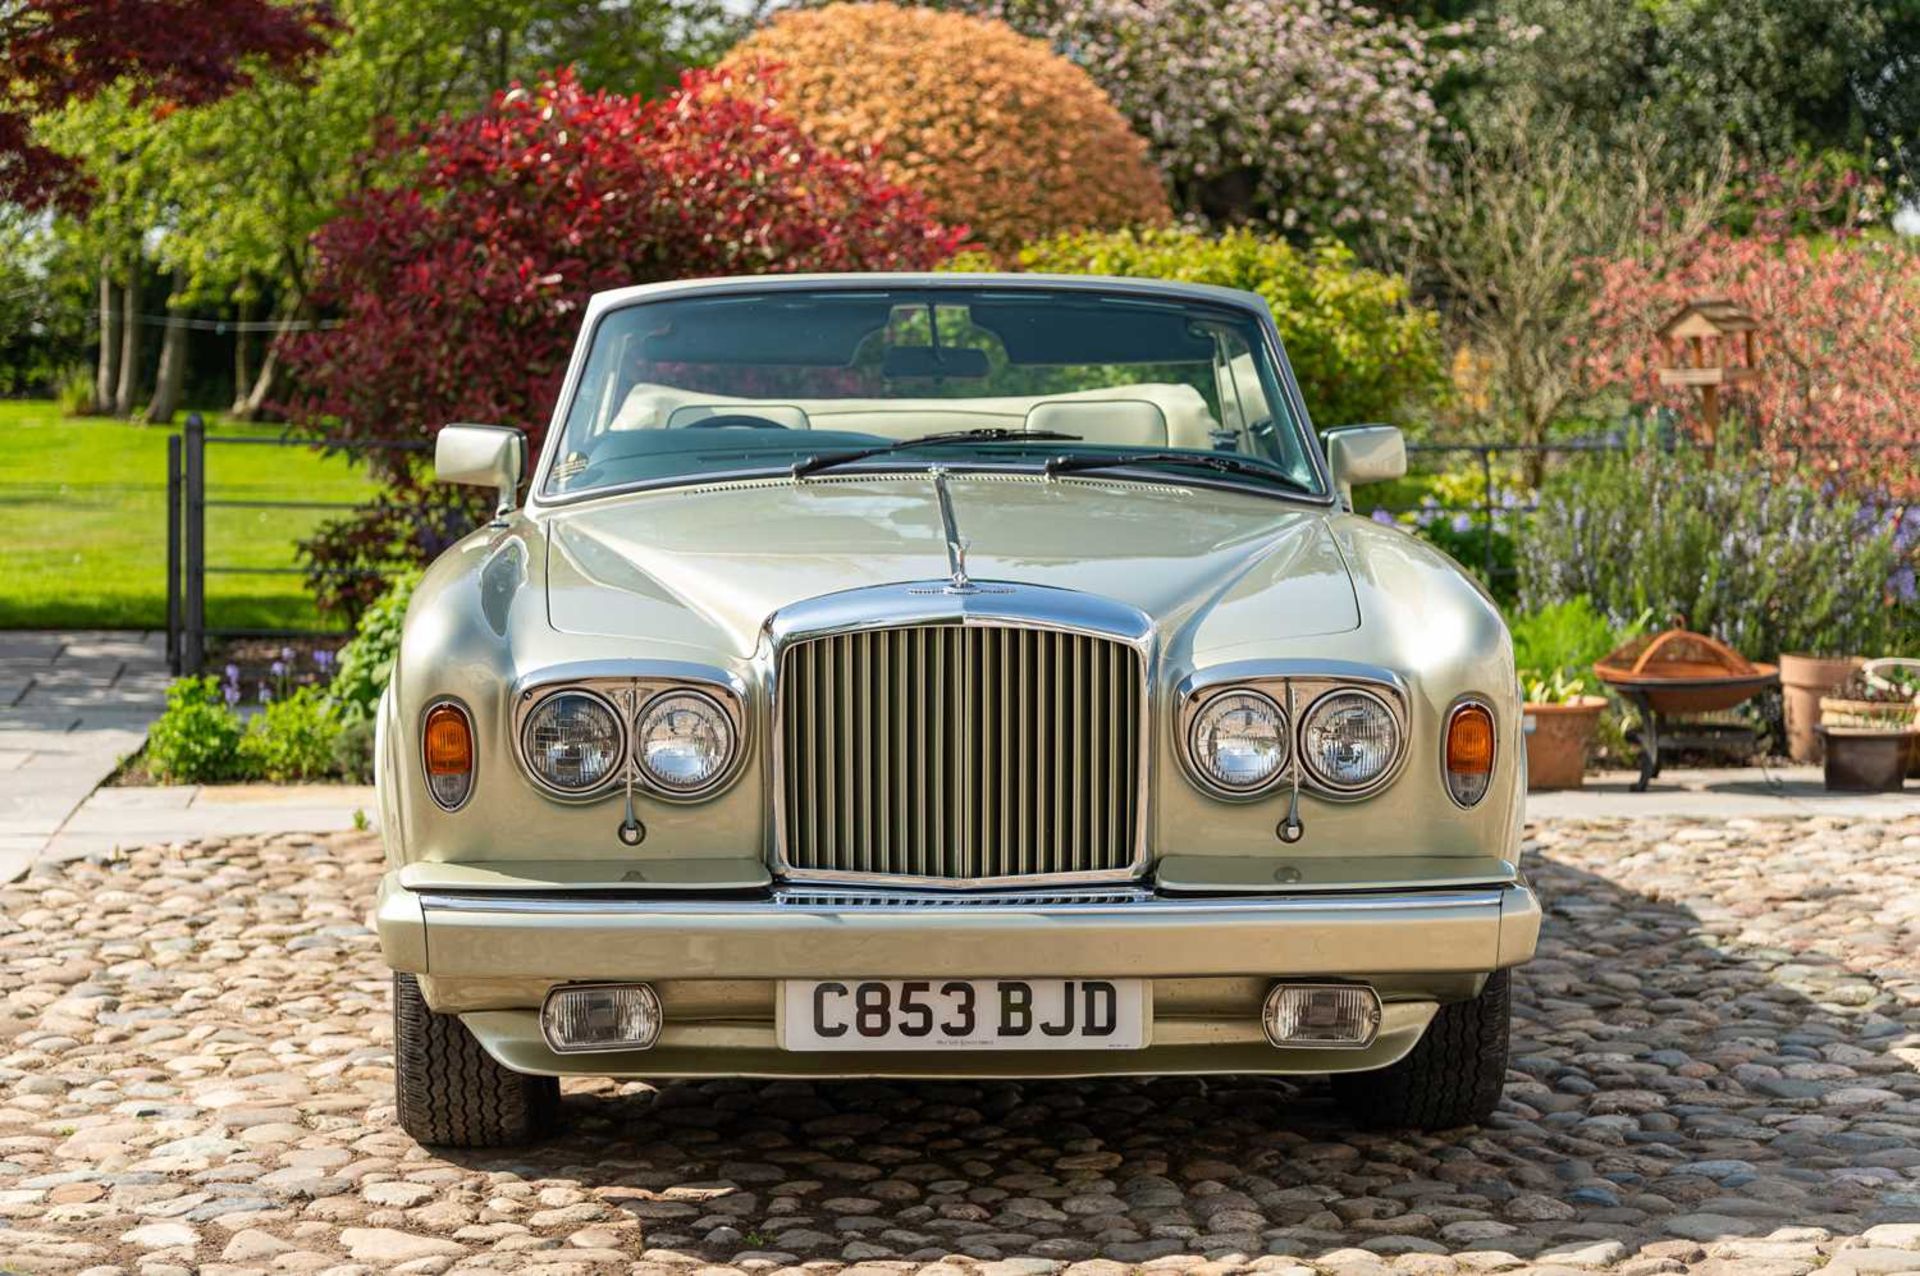 1985 Bentley Continental Convertible Rare early carburettor model by Mulliner Park Ward - Image 22 of 76